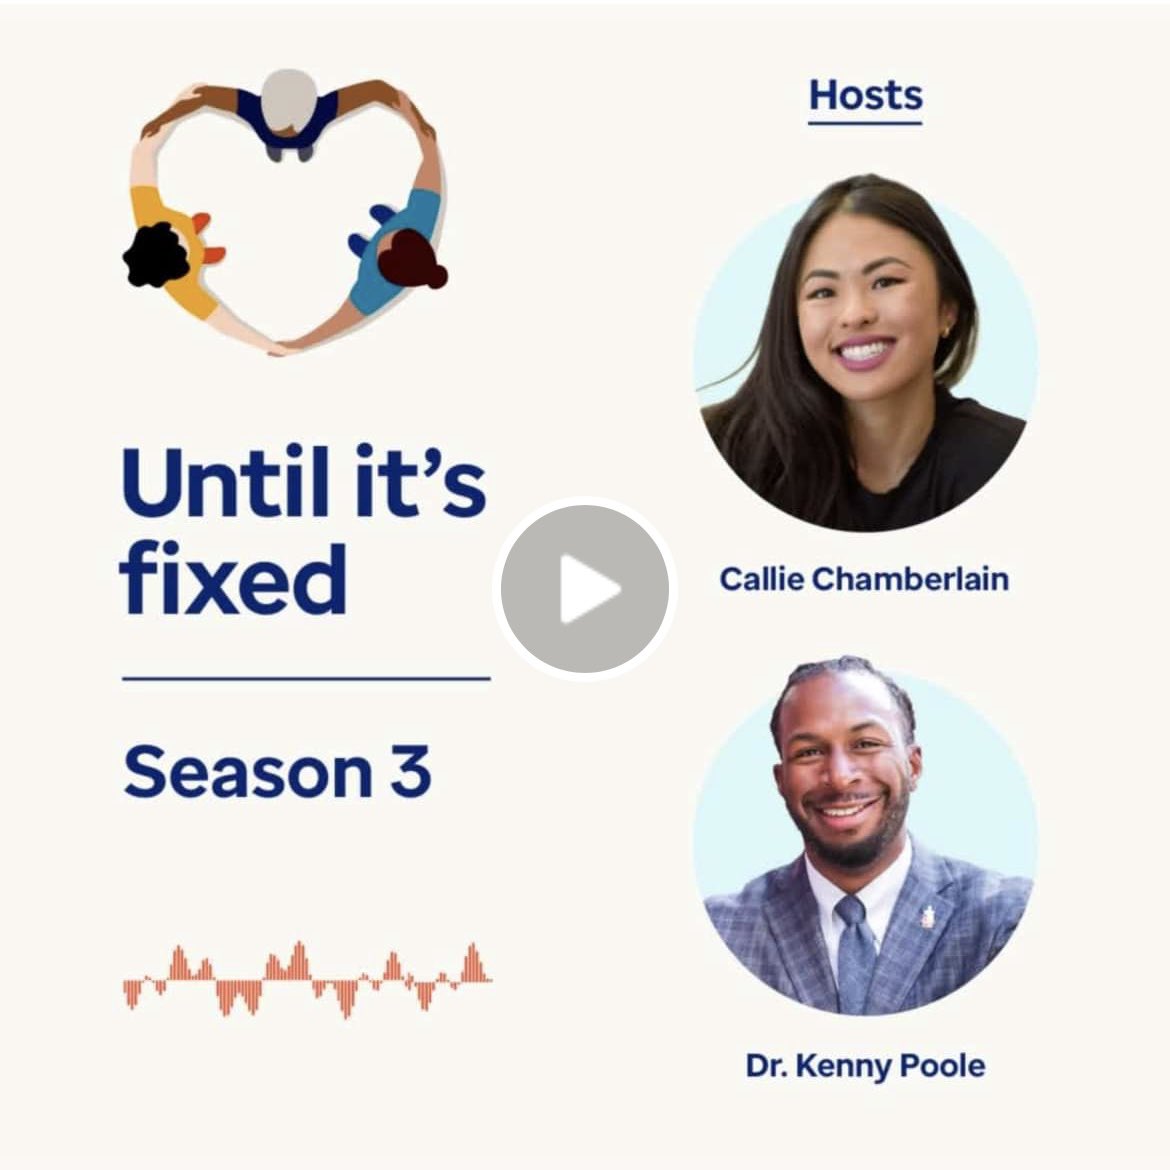 New Season ✅
New Topics ✅
New Look ✅ 

Until It’s Fixed is a 5-star rated health podcast from Optum with over 100,000 unique listeners about the toughest issues in health care.  Download, listen, and subscribe anywhere you get your podcasts or visit Optum.com/podcast